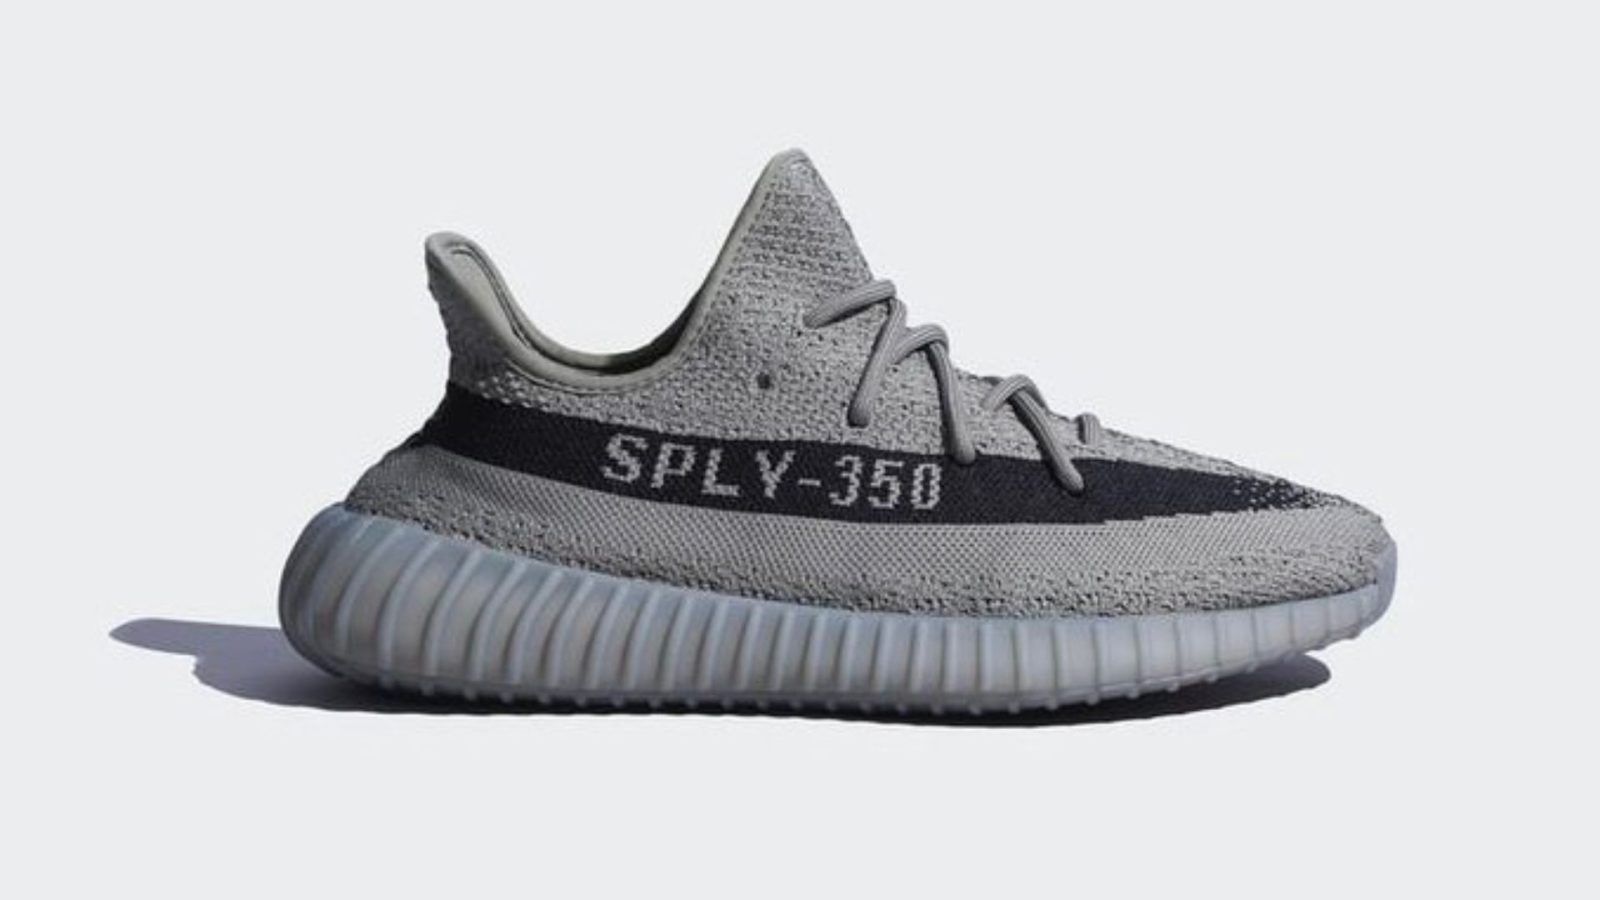 Adidas to release the unbranded 350 in 2023